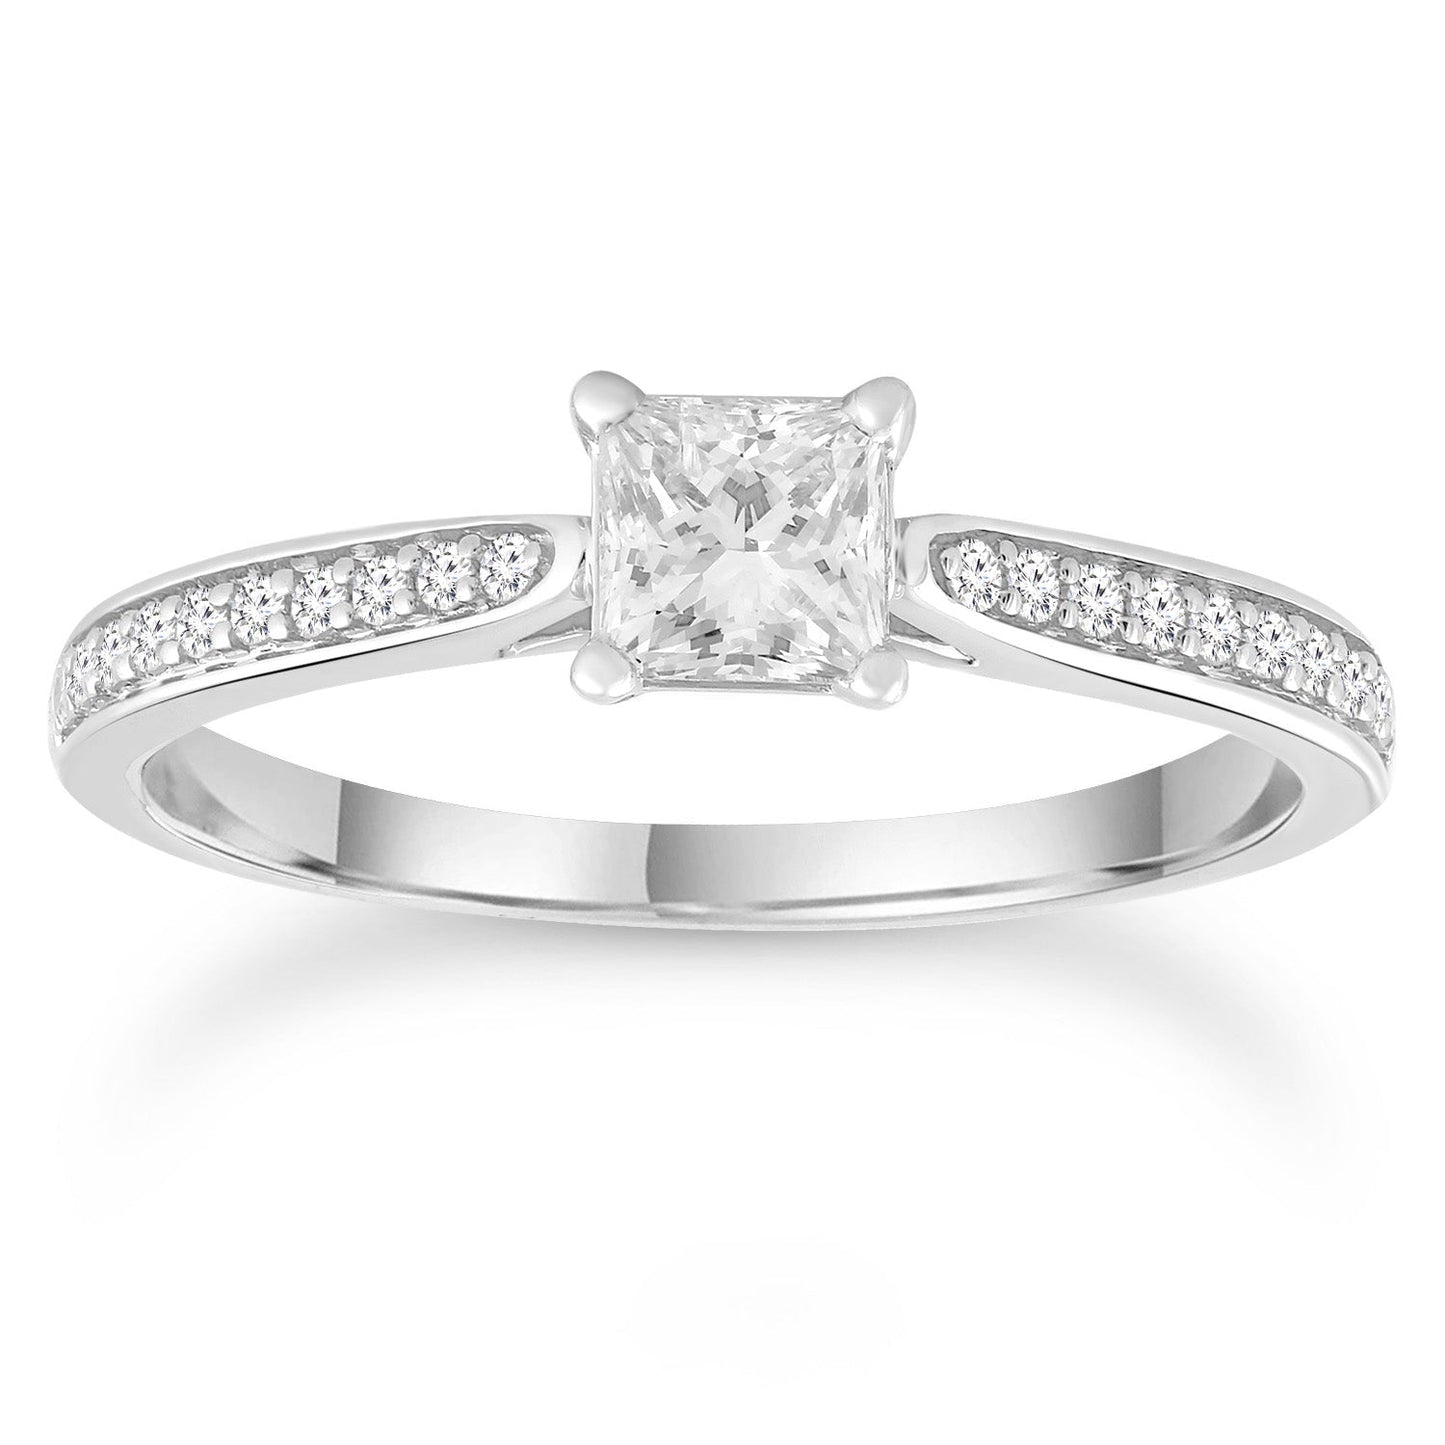 Diamond Ring with 0.63ct Diamonds in 9K White Gold